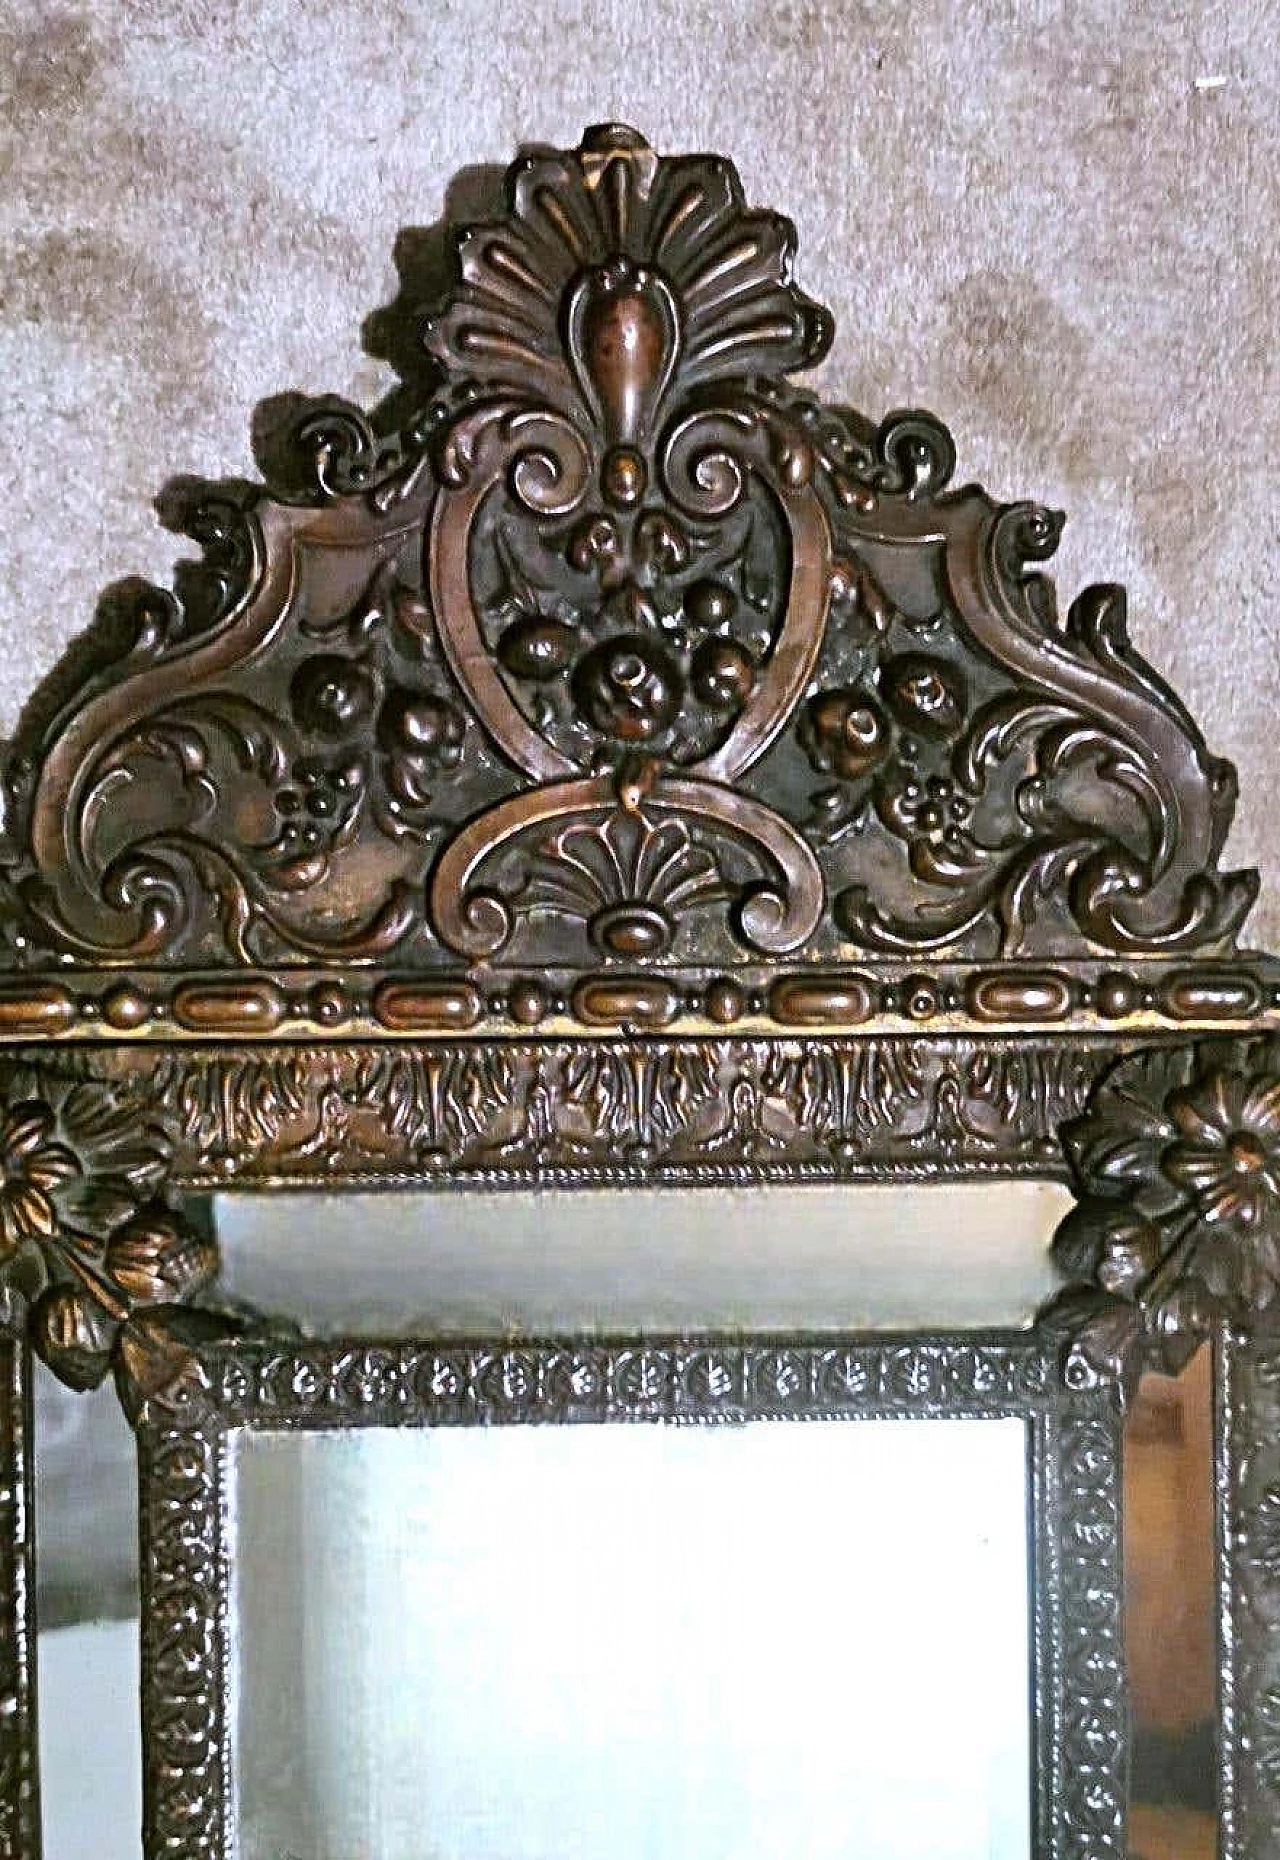 Napoleon III style wall mirror with repoussé work in burnished brass, mid-19th century 6